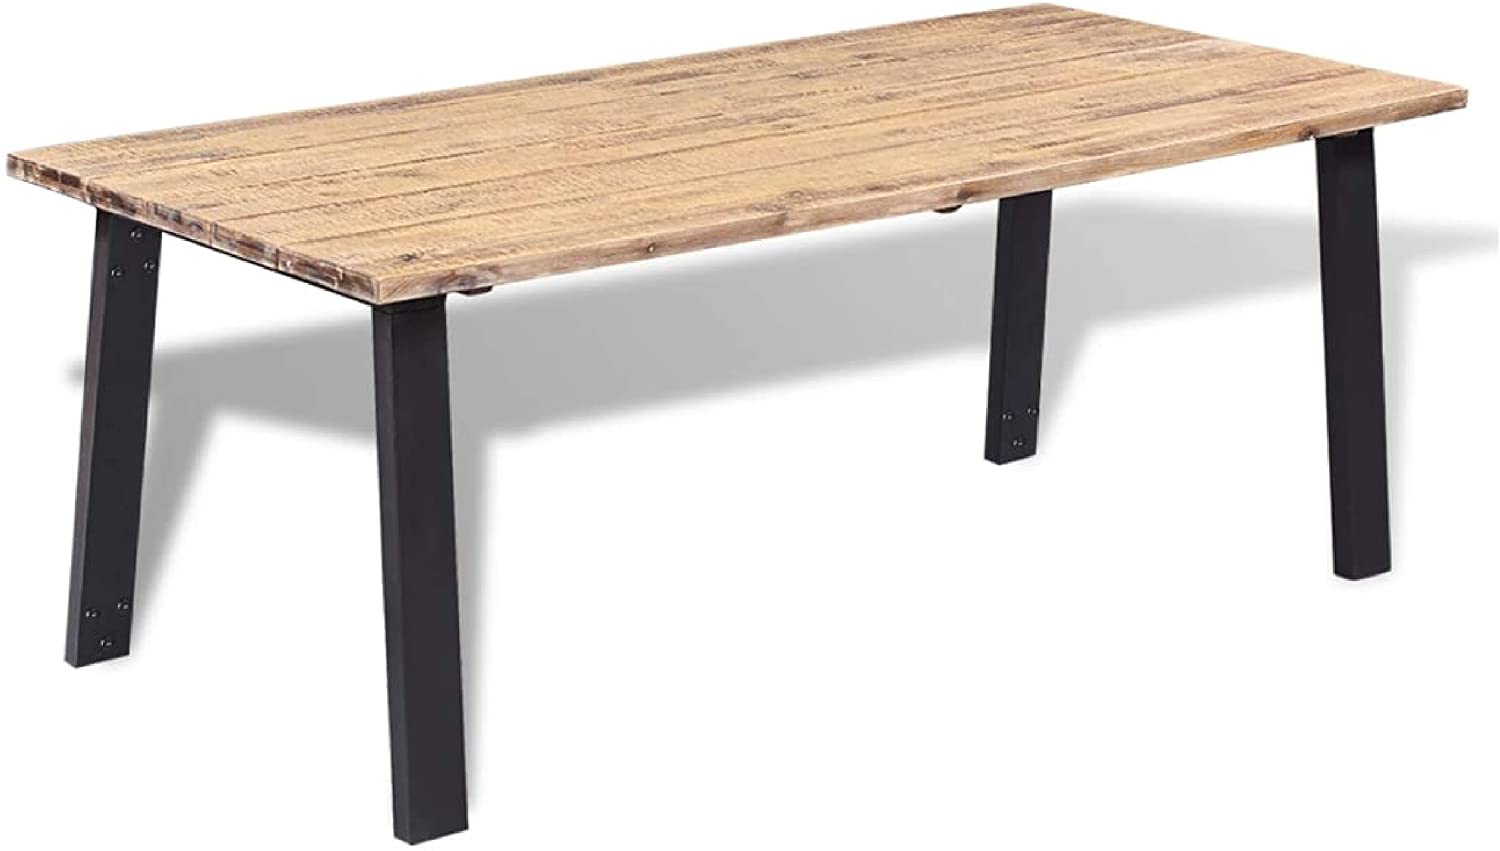 B08DM6QHX7 Kitchen & Dining Room Table, Dining Table Solid Acacia Wood 66.9"x35.4"